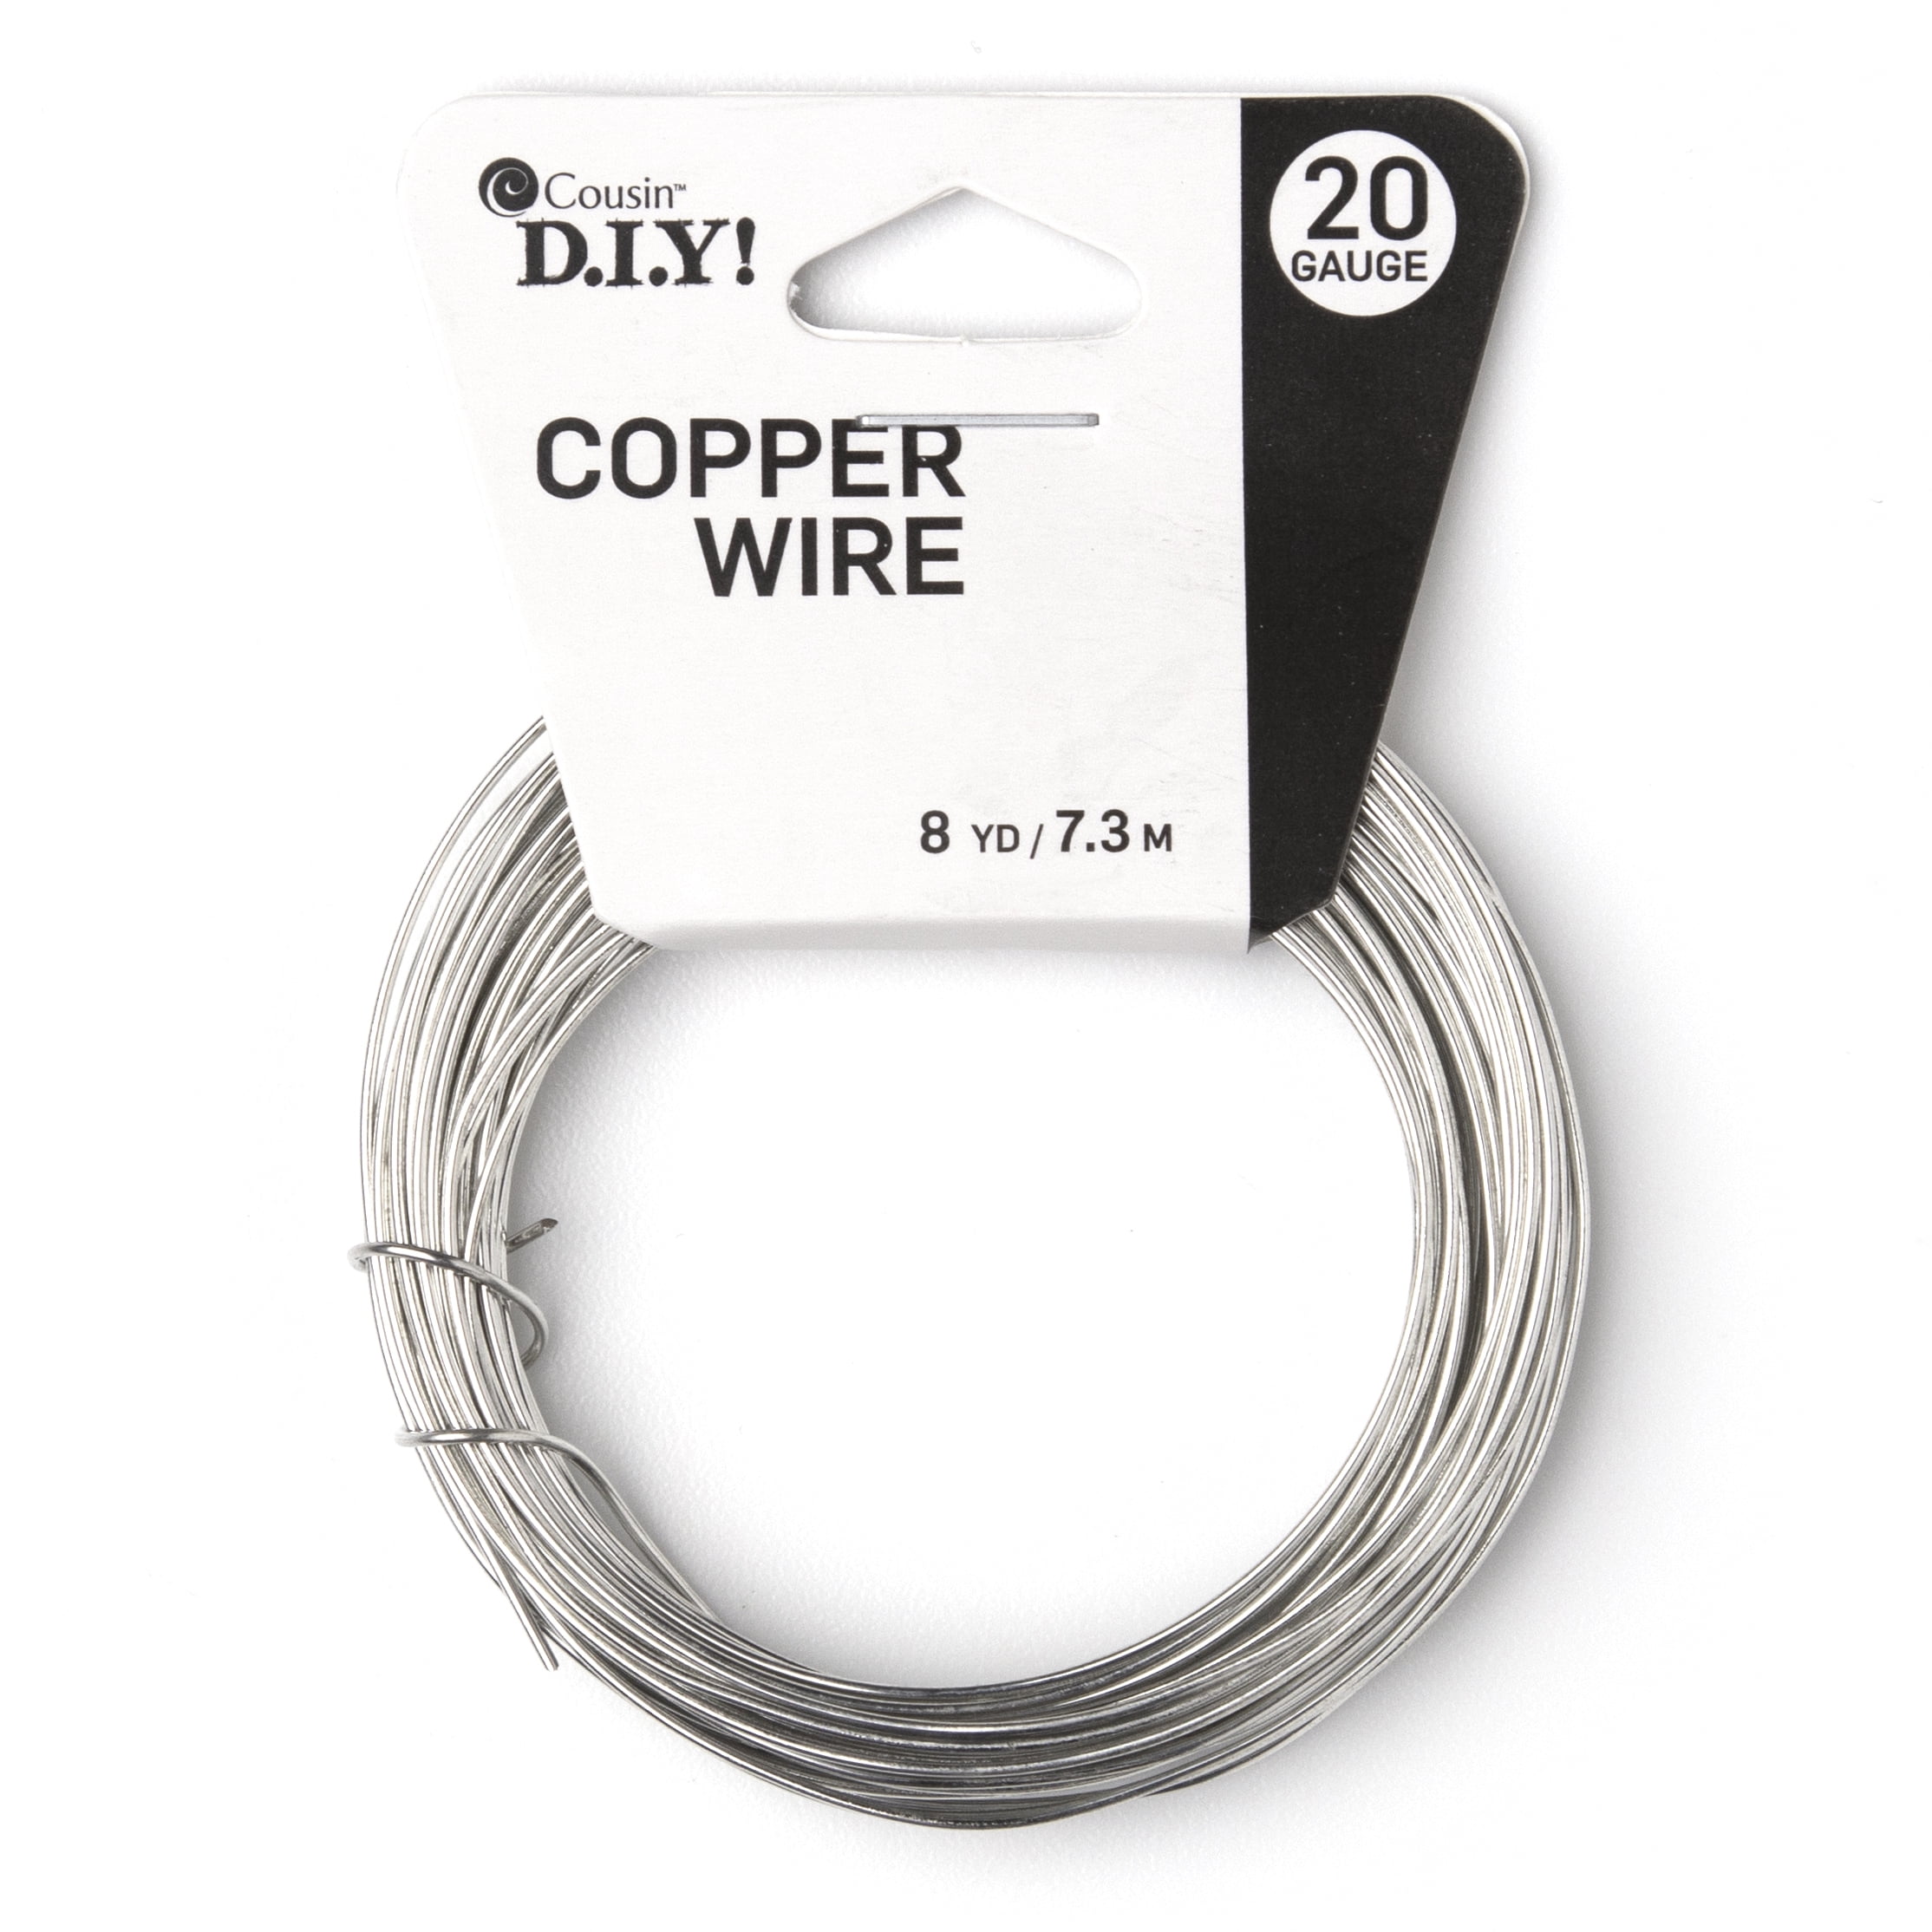 All About Jewelry Wire - Which Gauge Wire to Use for What